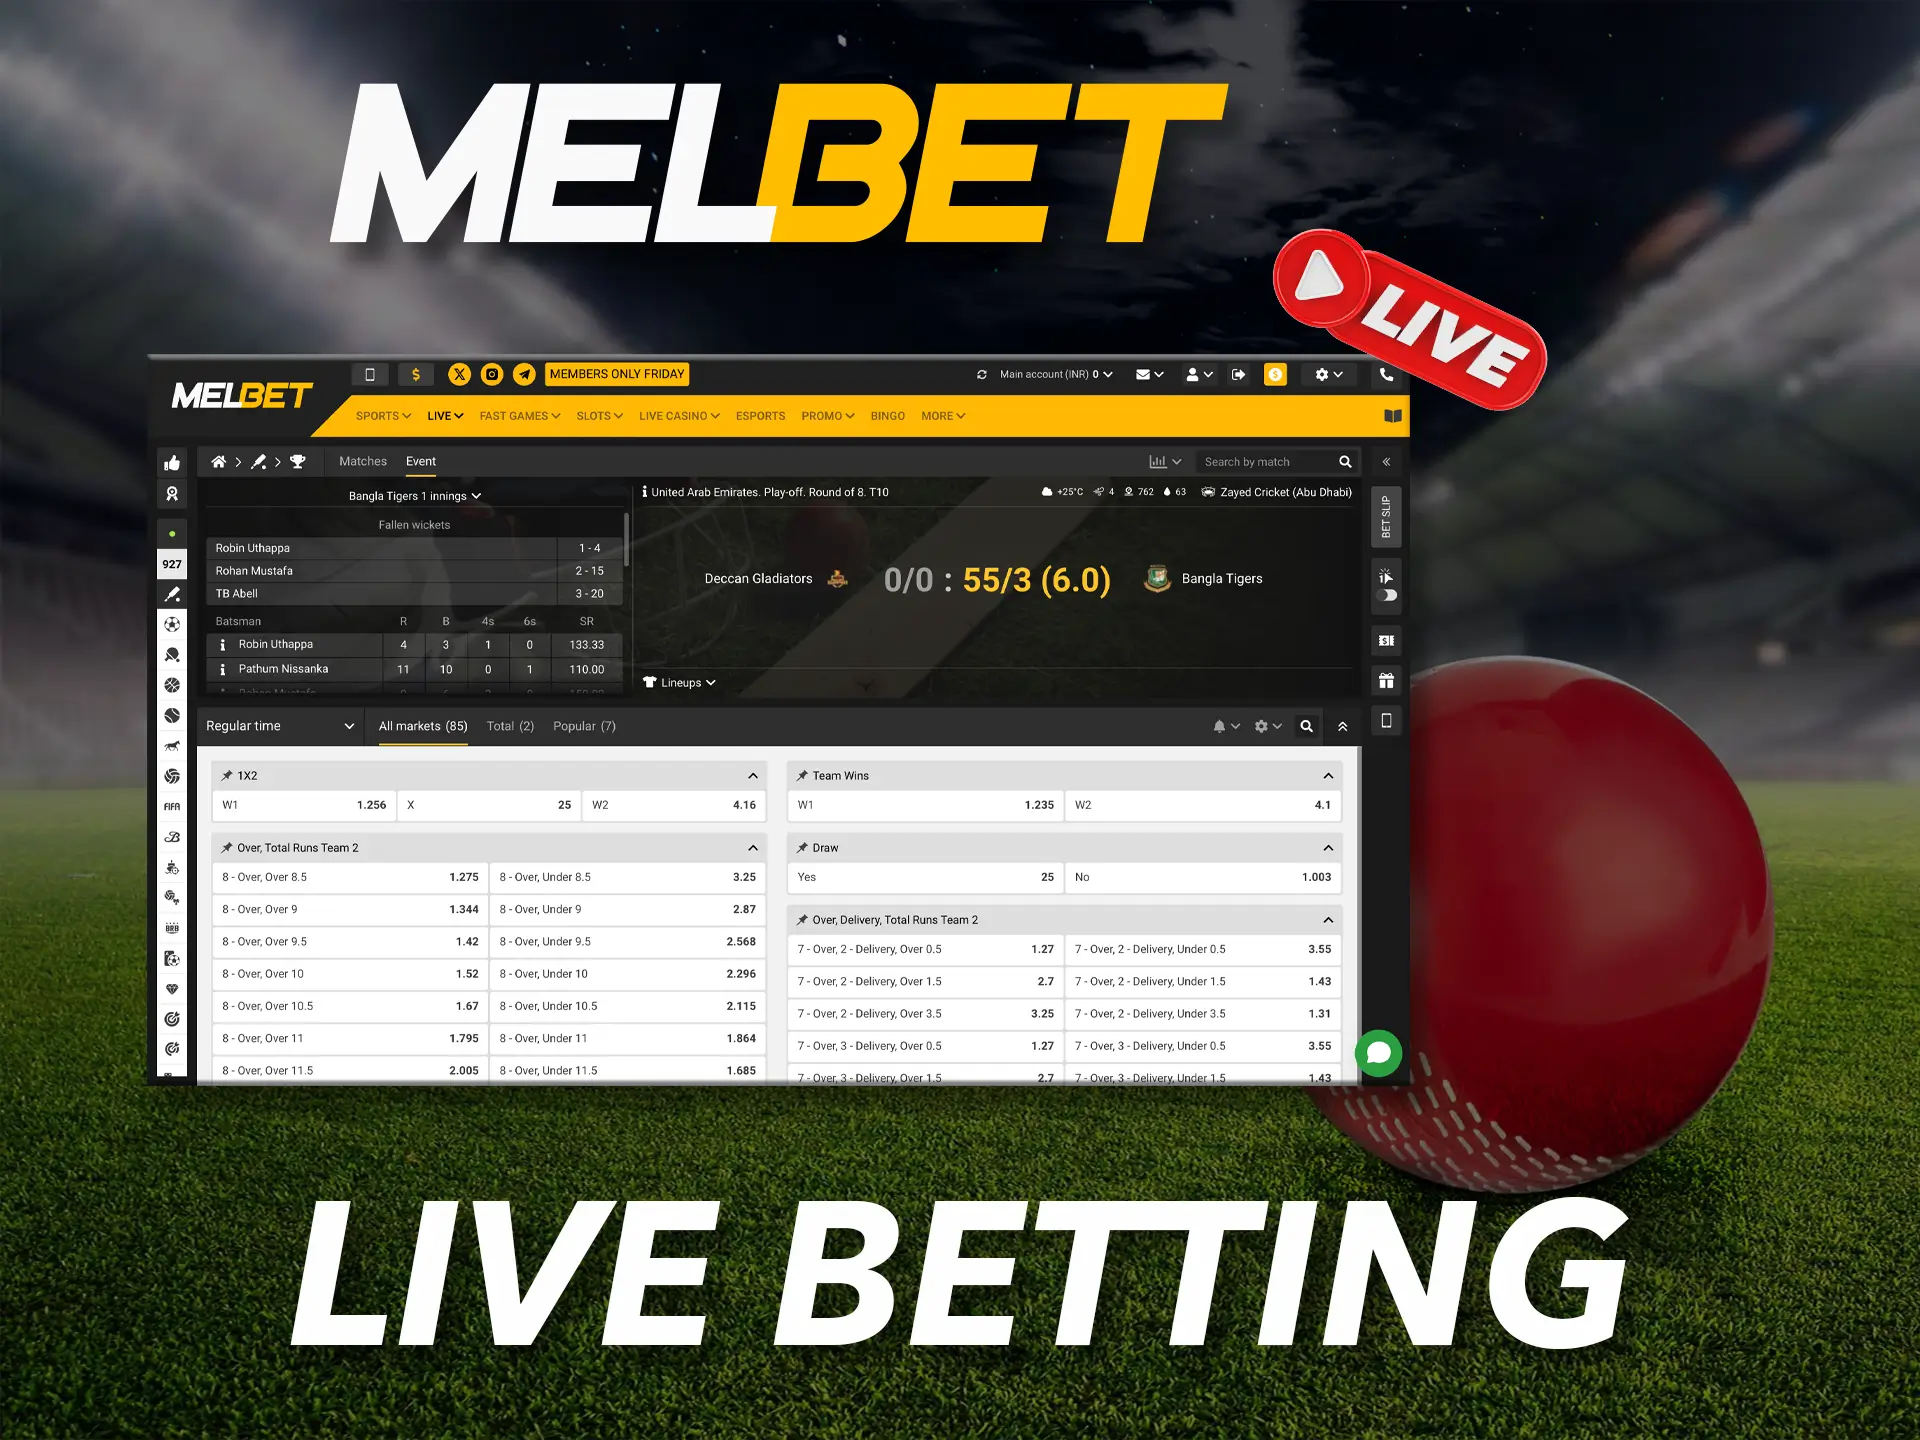 Take a good opportunity to win by betting in real time at Melbet.